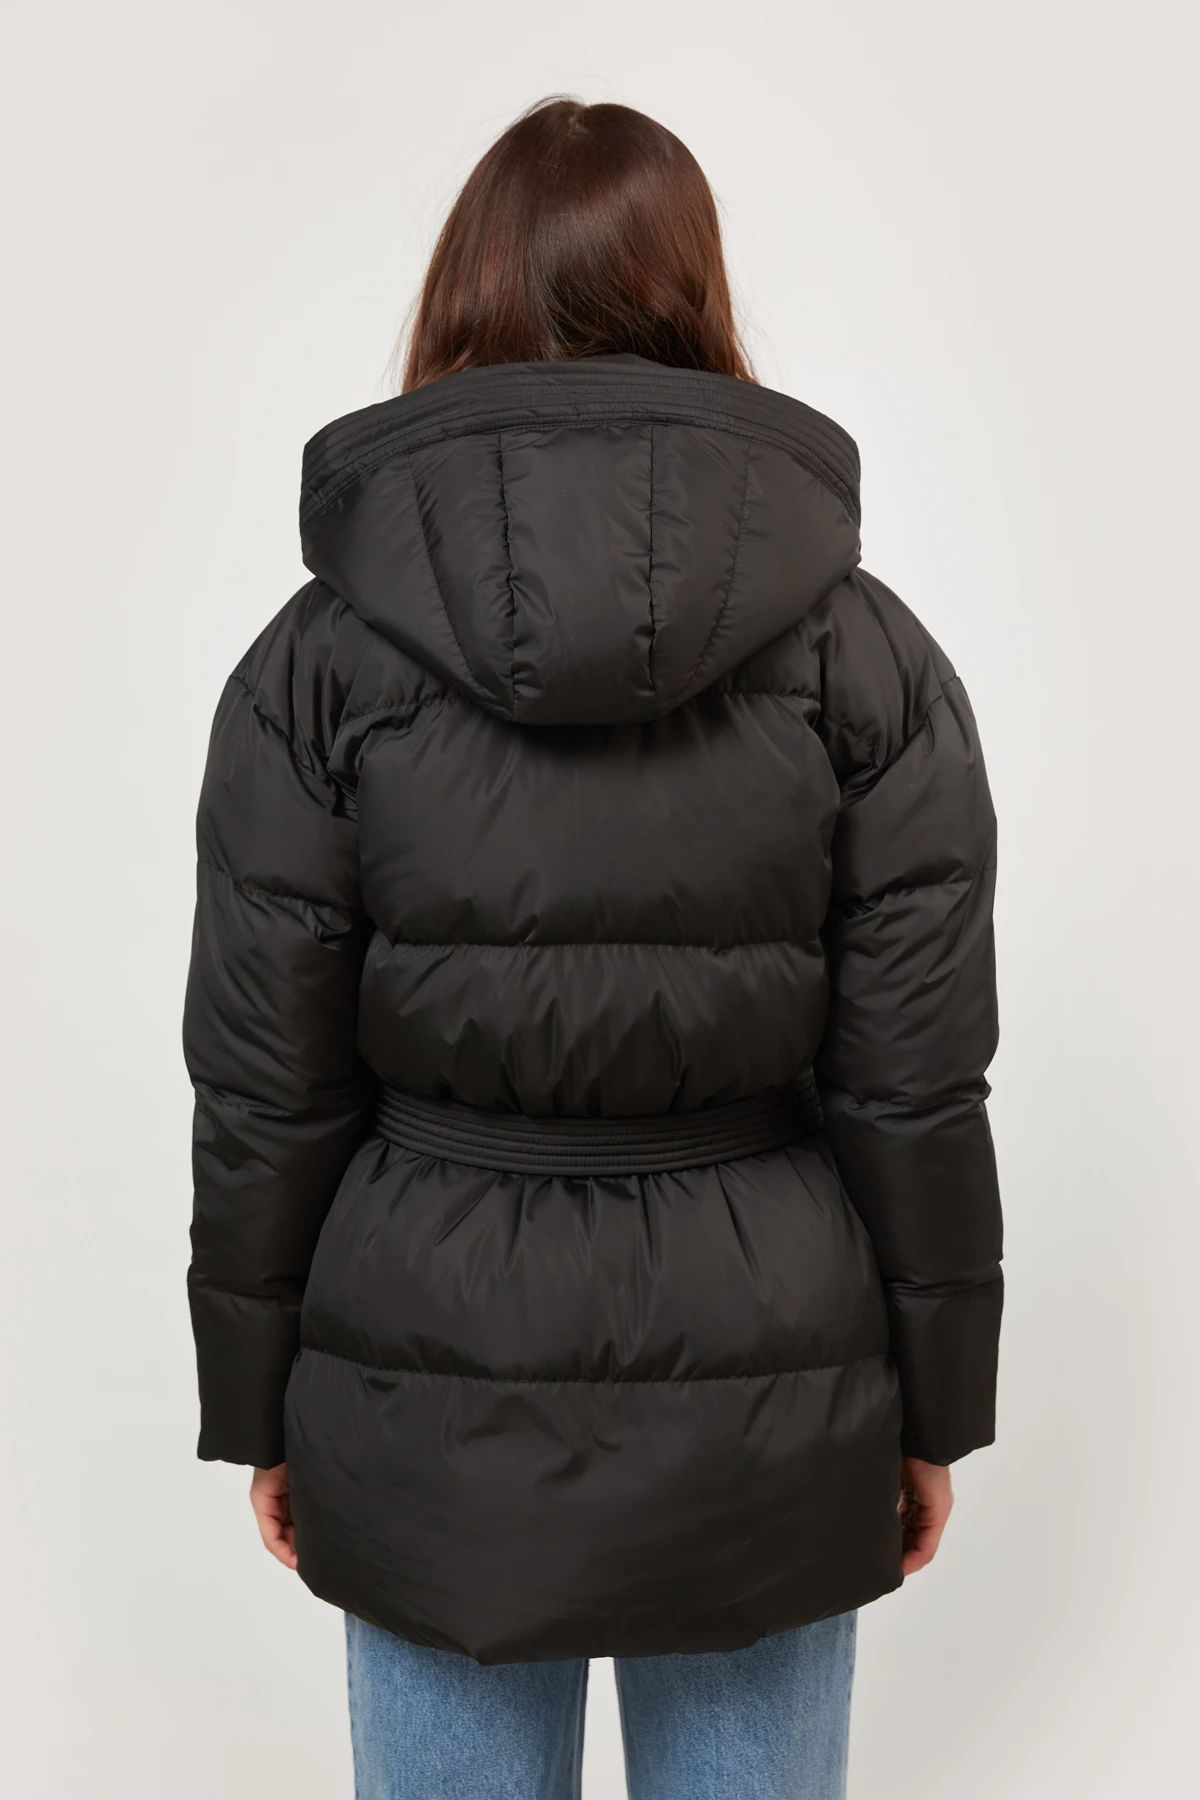 Quilted black jacket , photo 8